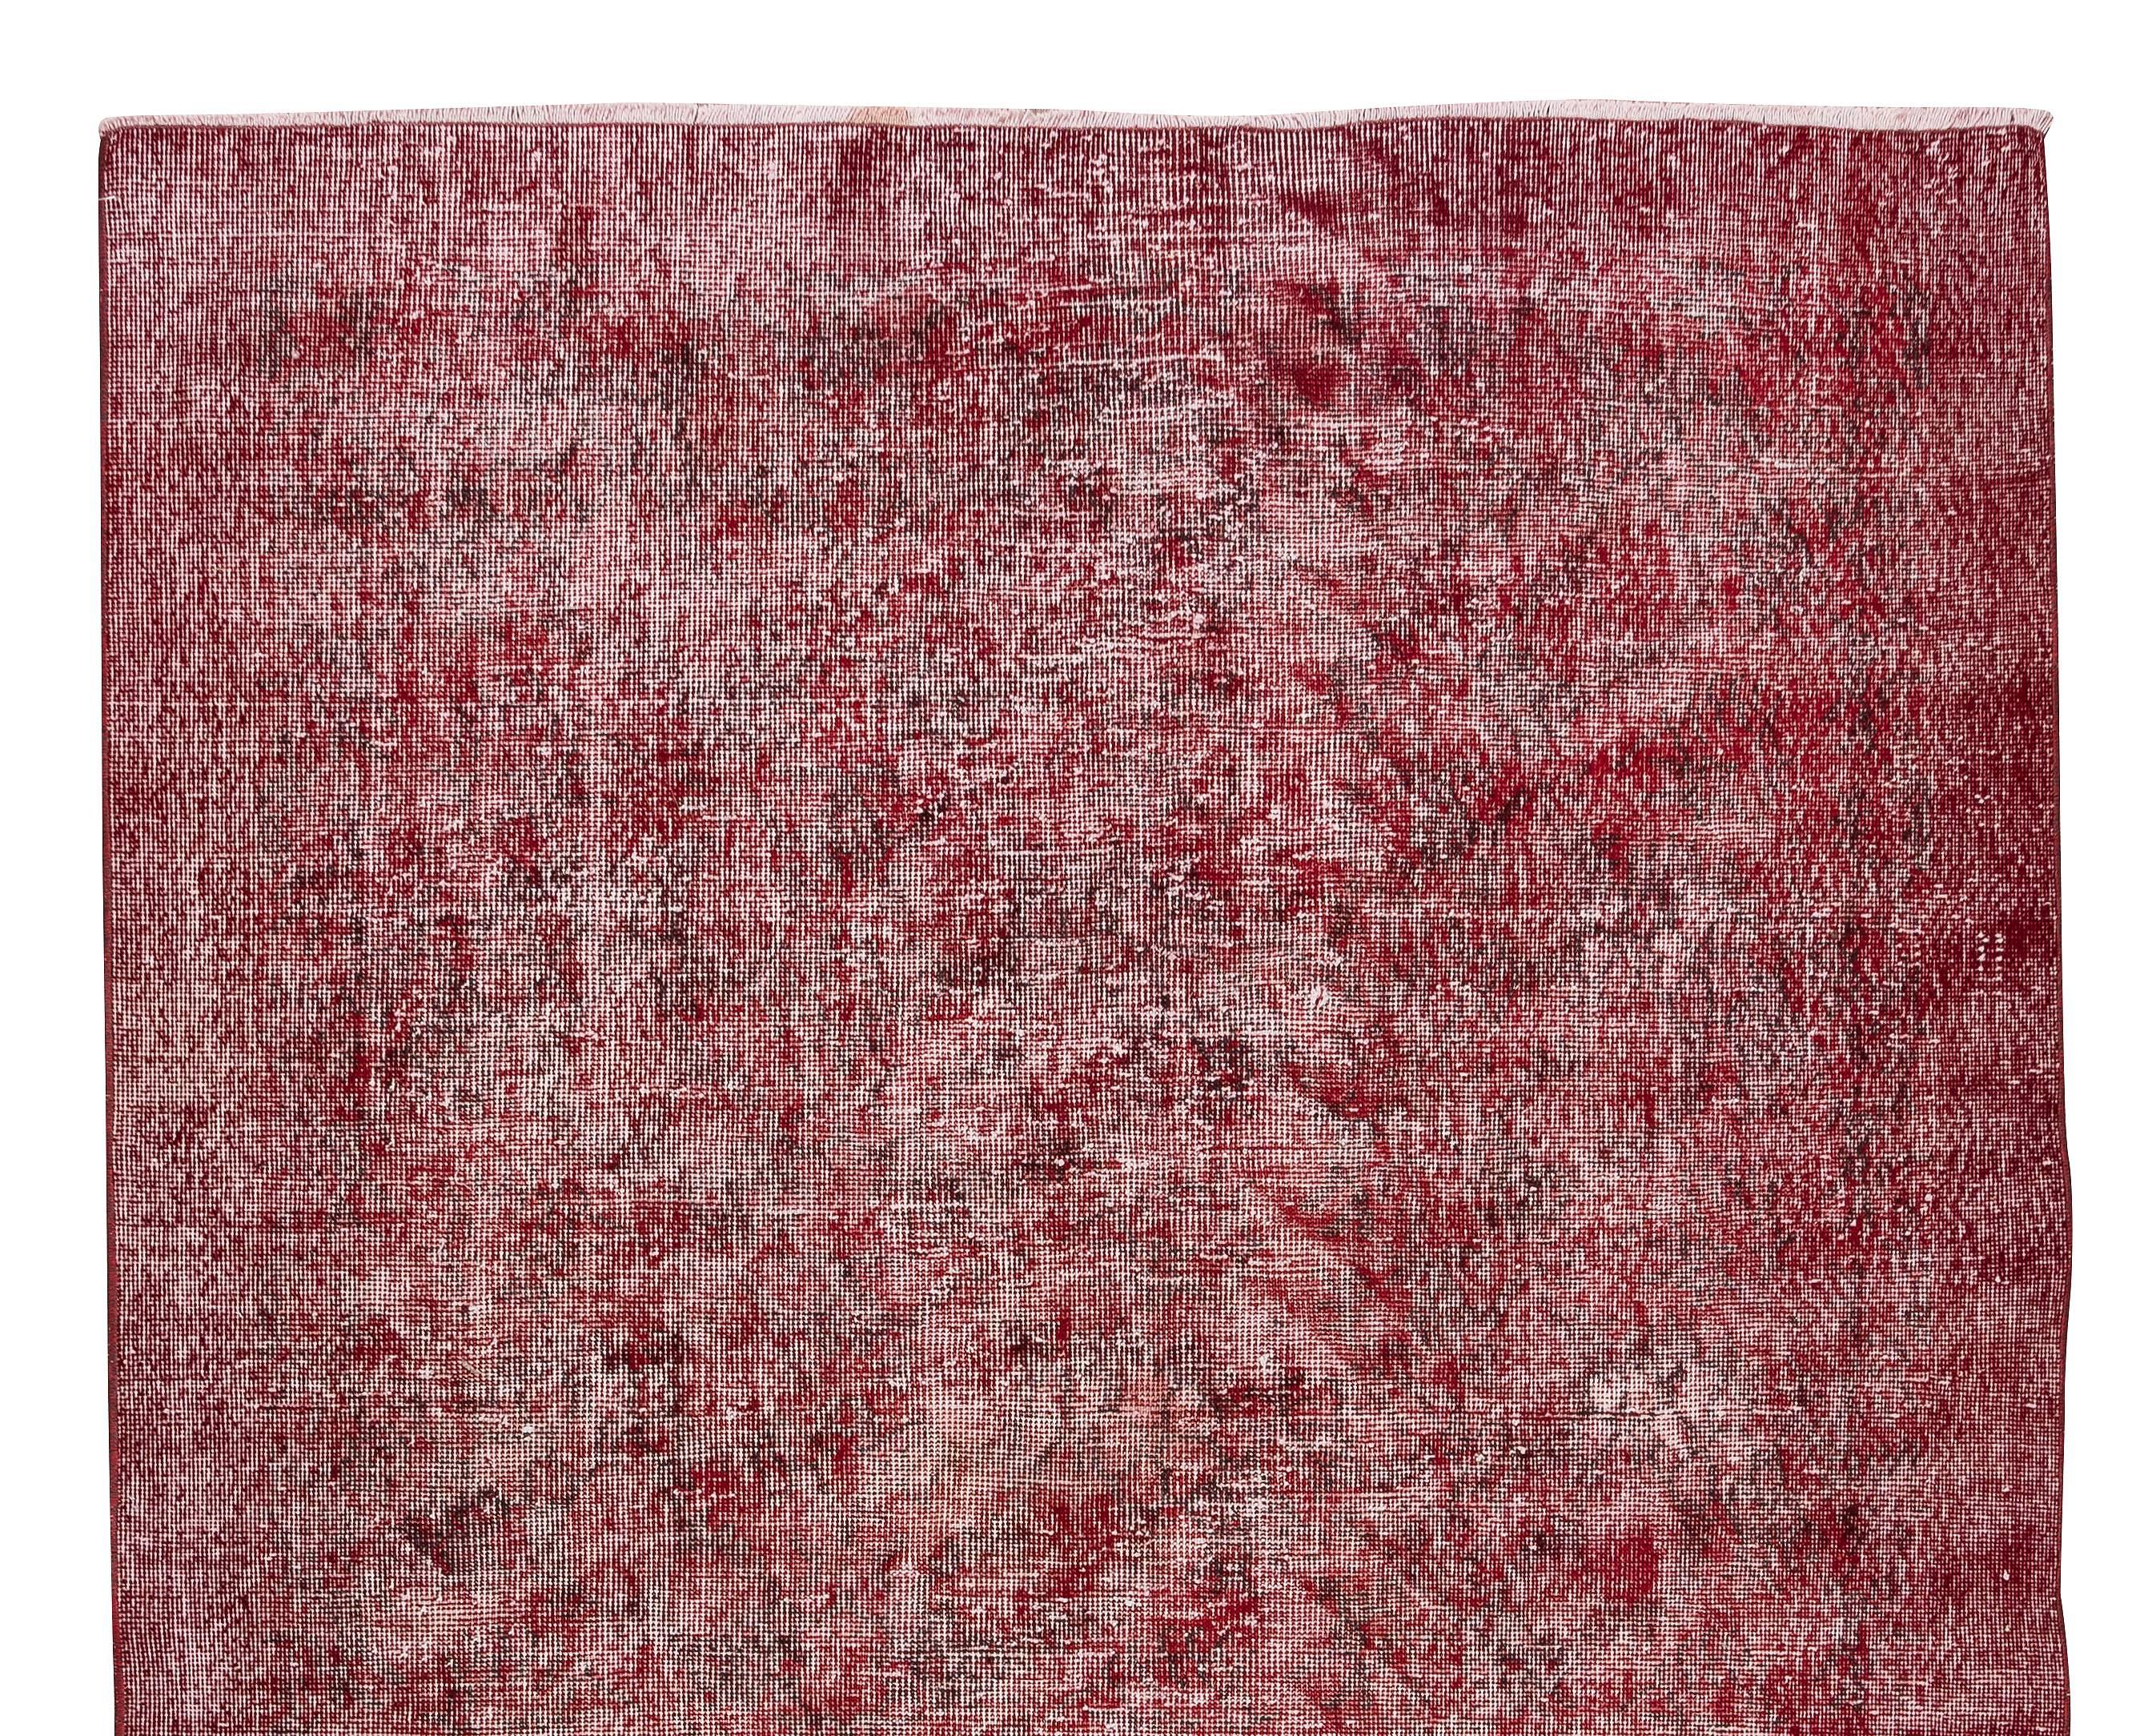 Hand-Knotted Handmade Turkish Area Rug in Burgundy Red, Shabby Chic Vintage Carpet For Sale